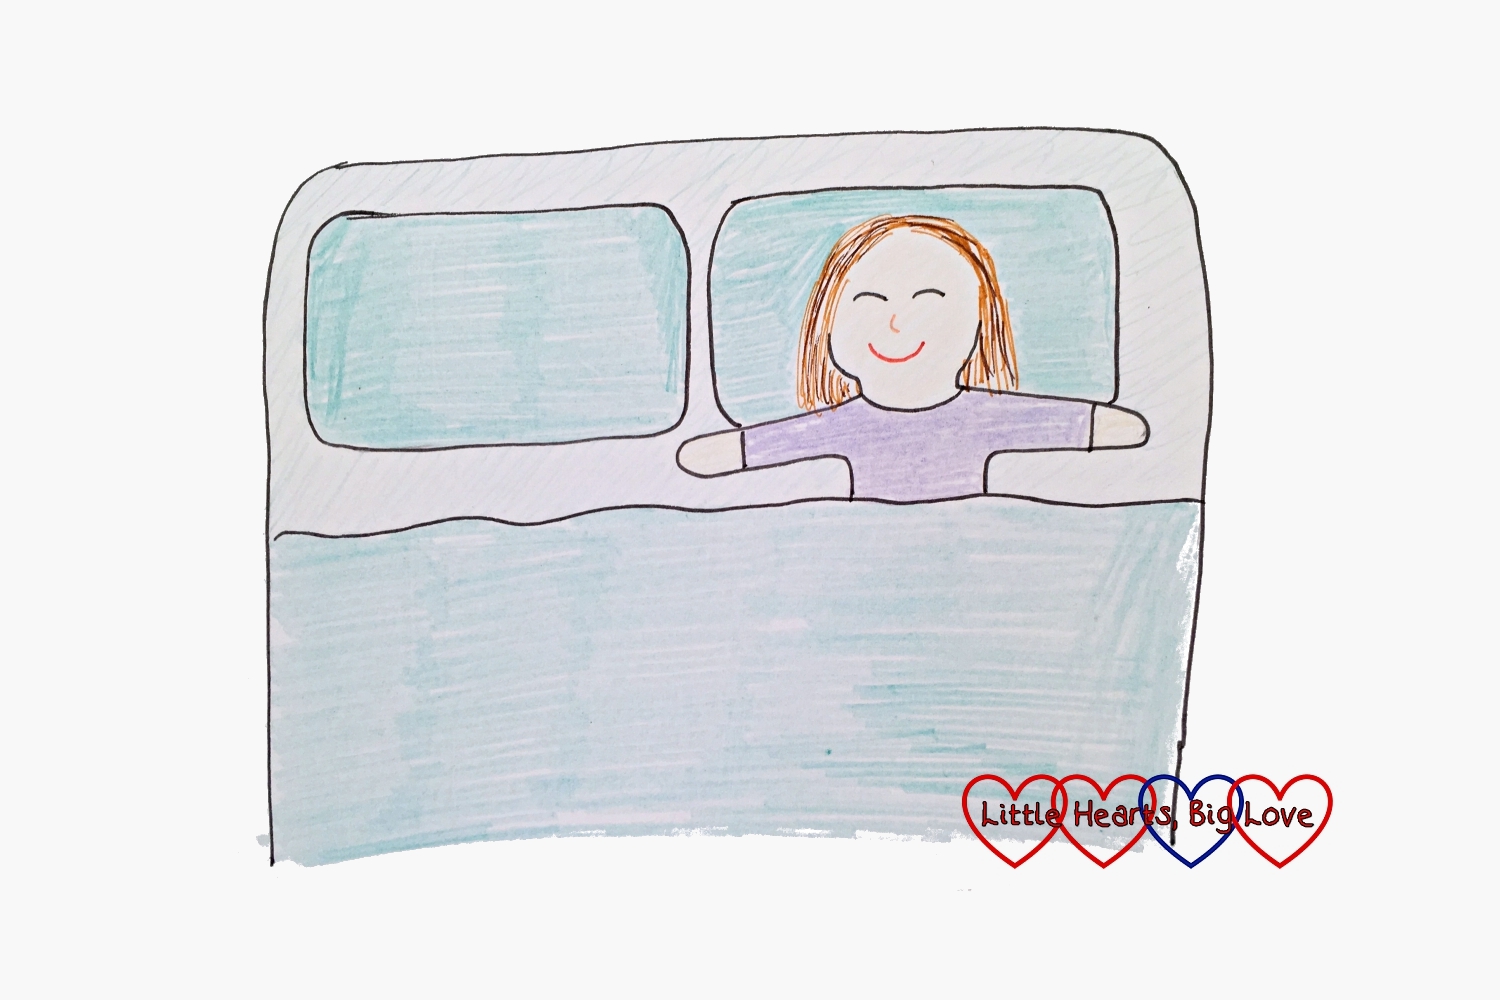 A drawing of Mummy sleeping in a double bed by herself